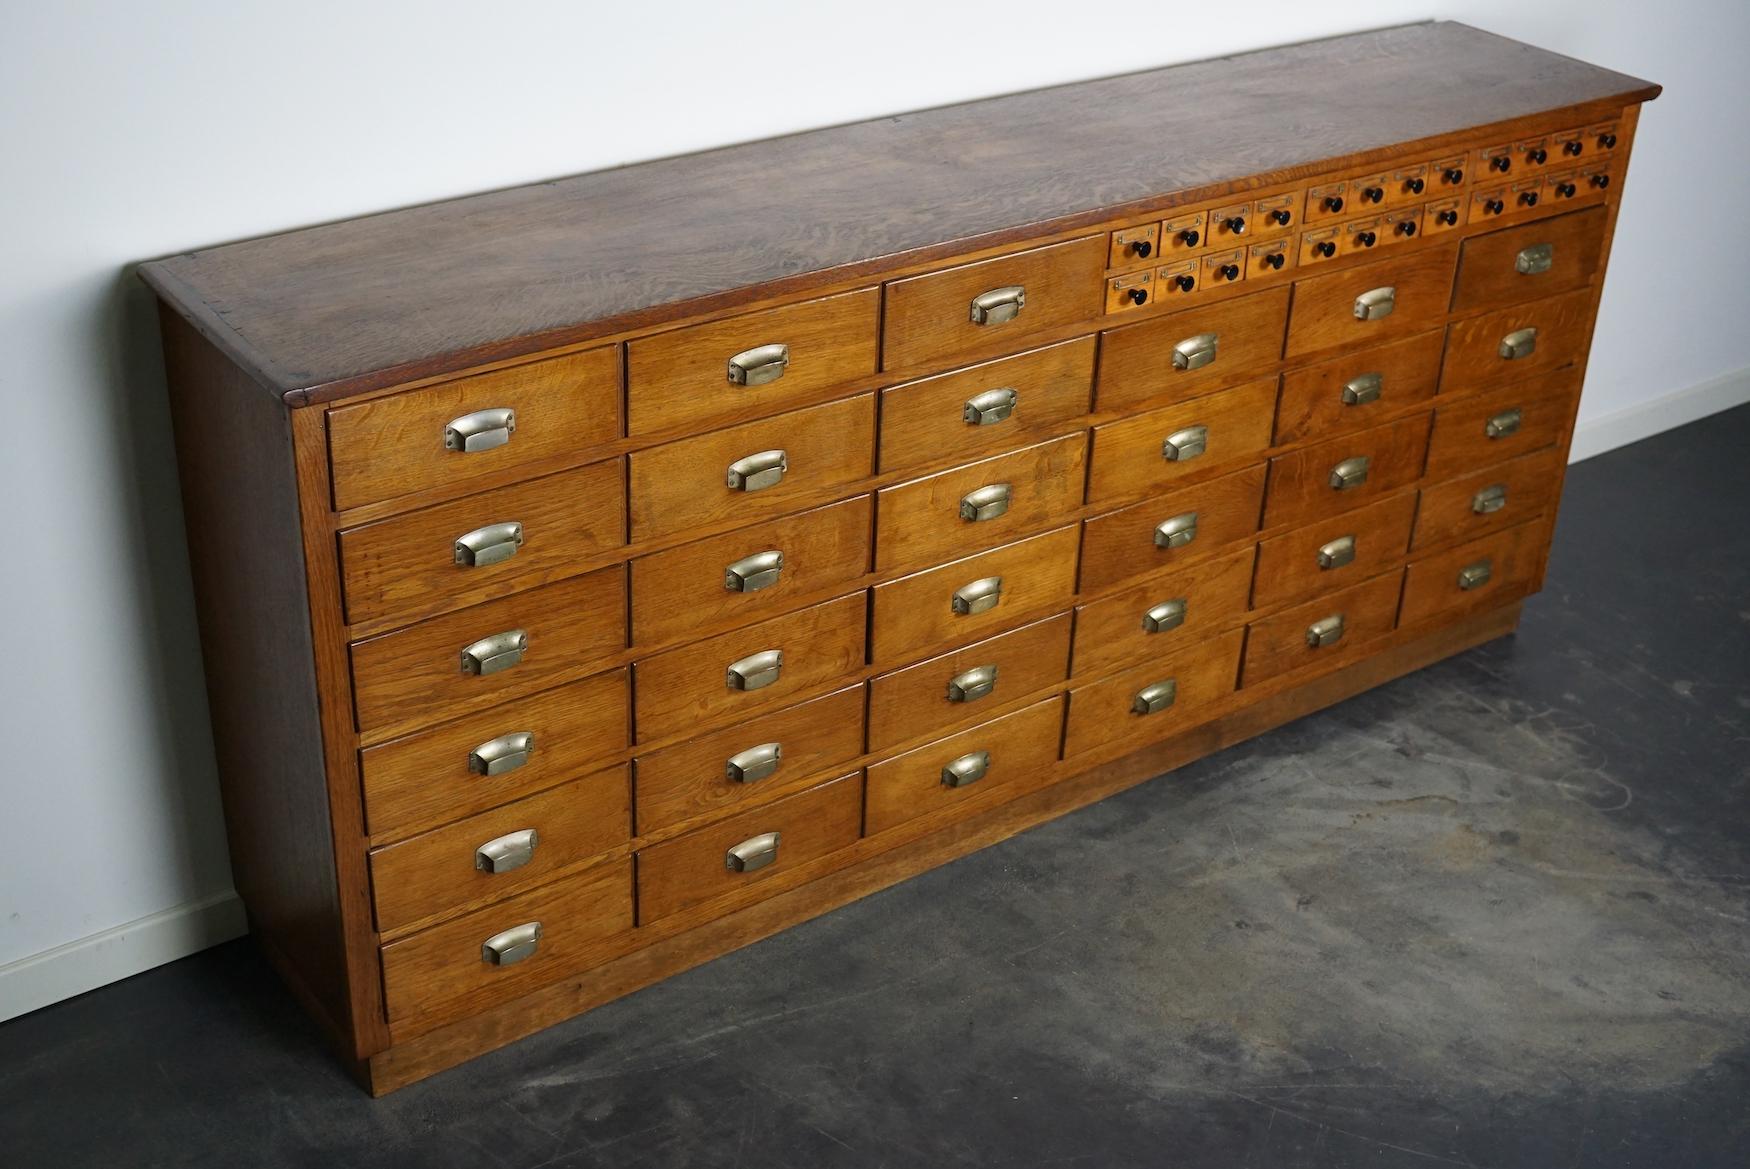 This apothecary cabinet was made circa 1940s in the Netherlands and used in a pharmacy until the 1990s. It features 33 large drawers with metal cup handles and 24 small ones with black knobs and metal name card holders.